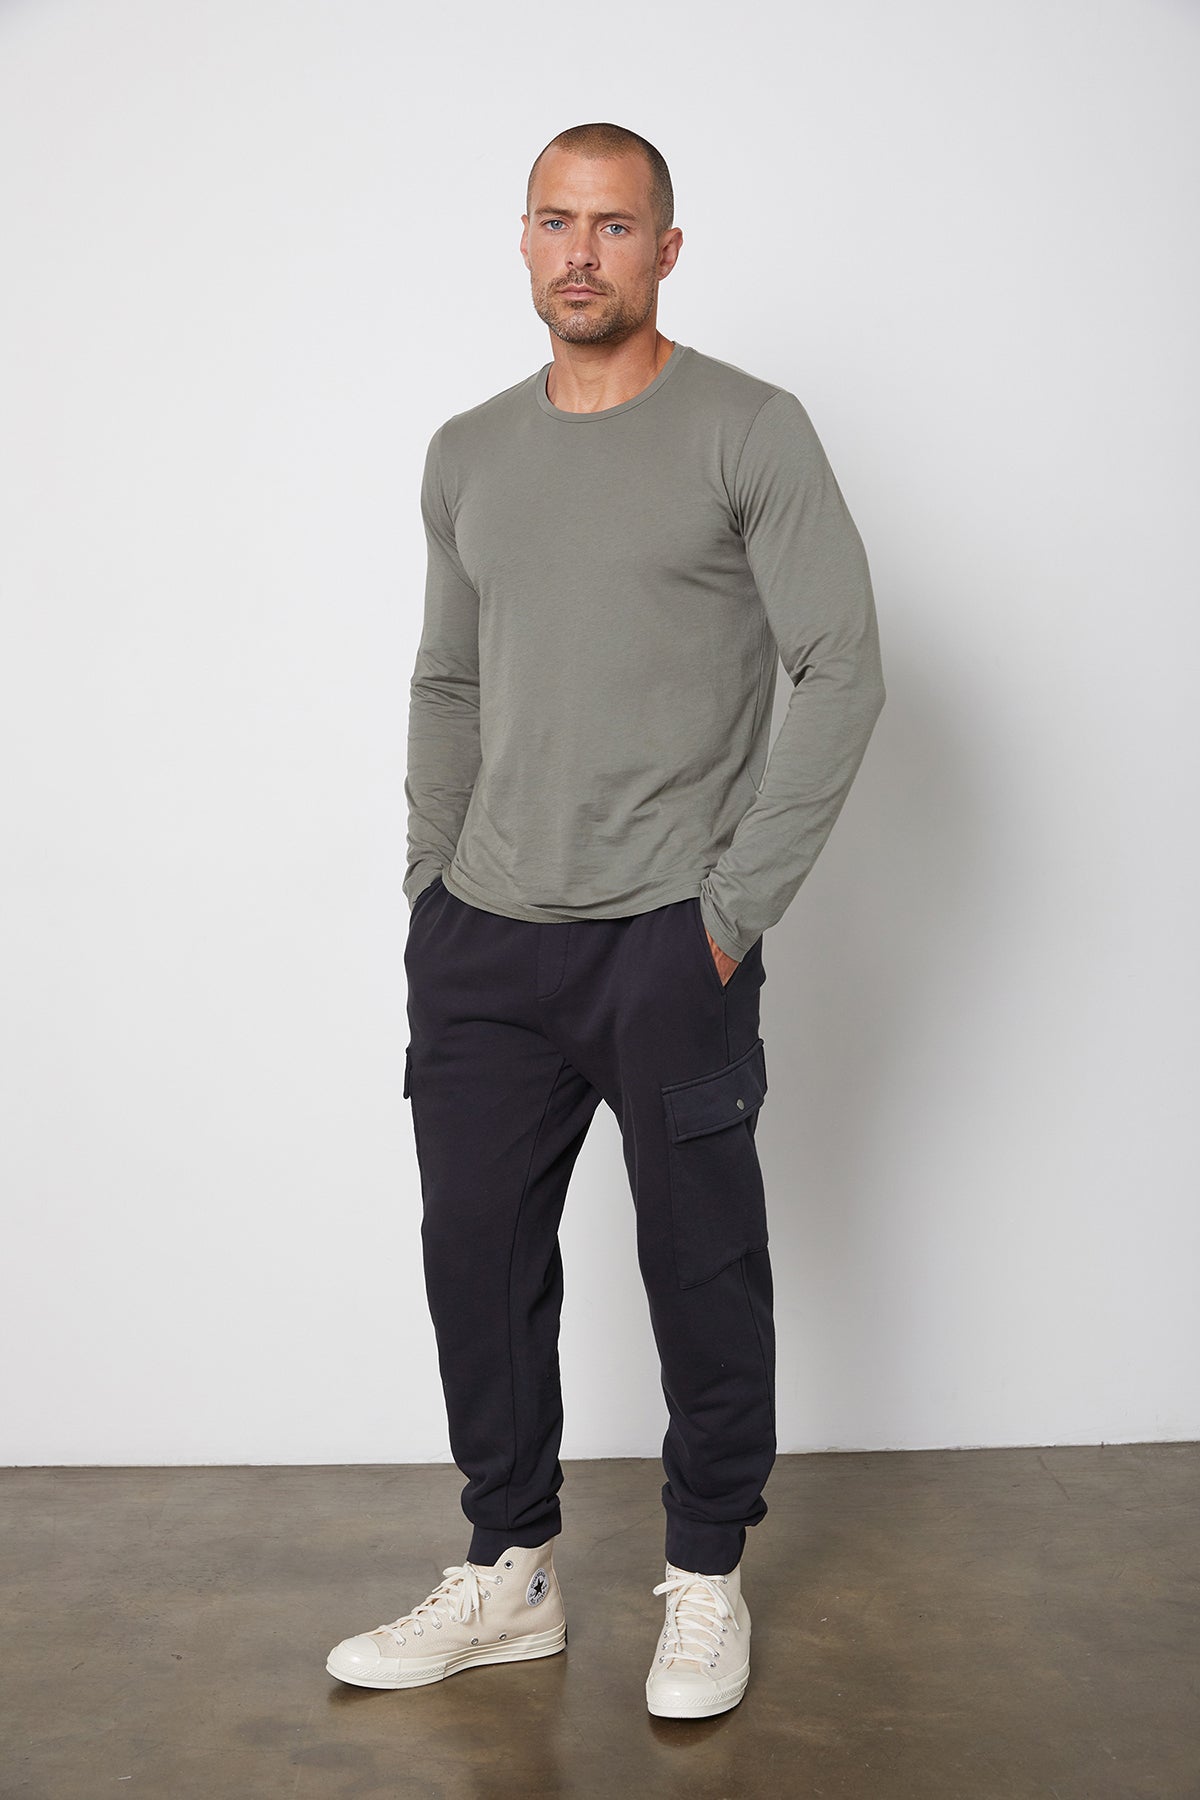 Skeeter Whisper Classic Crew Neck Tee in Otter with Black Sweatpants-25328816292033